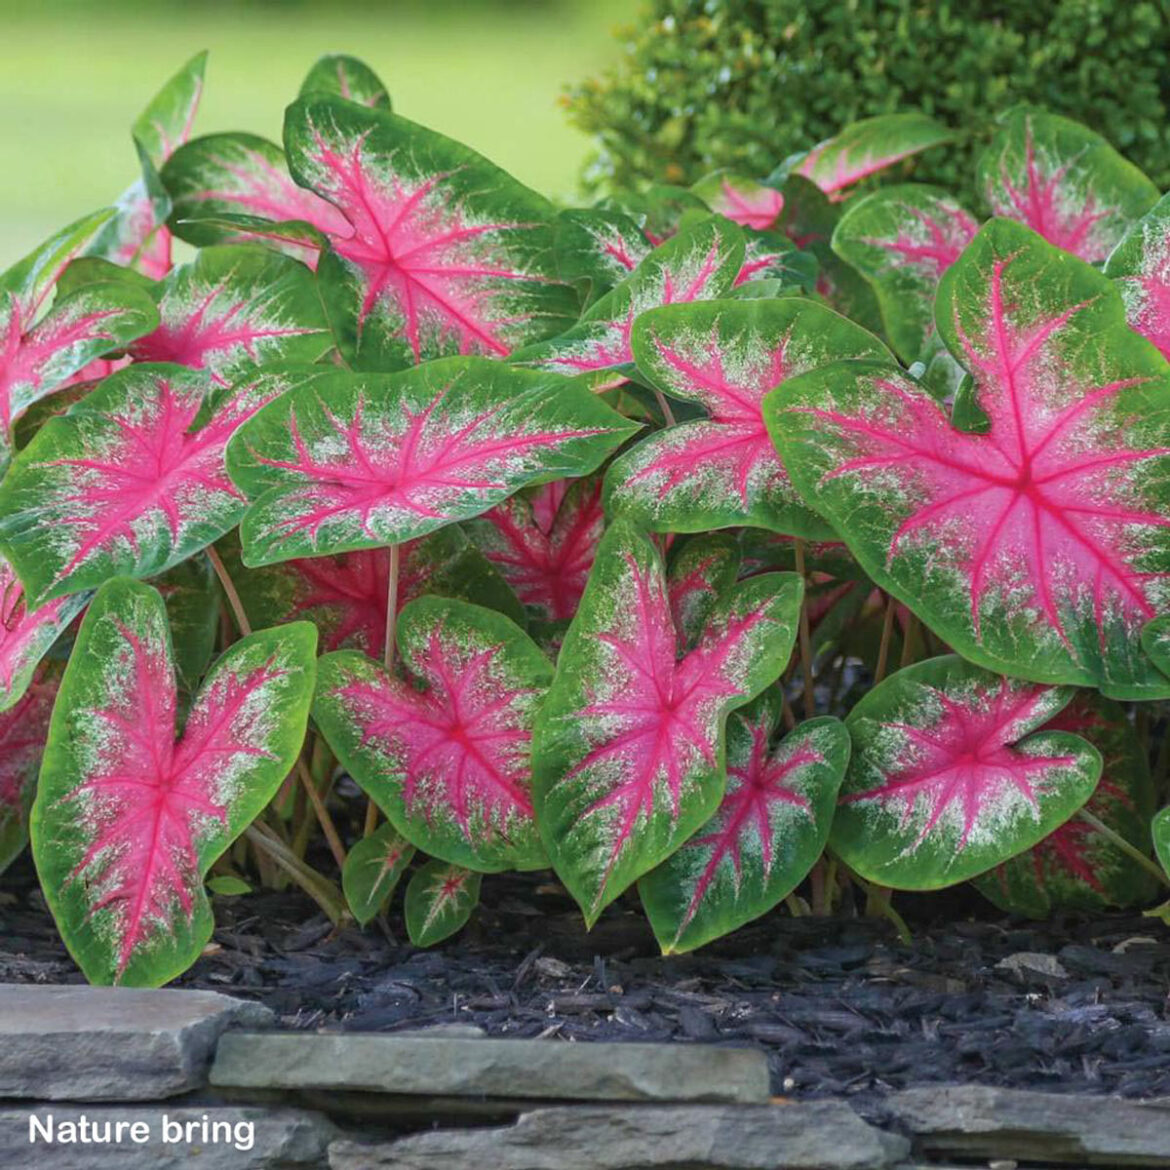 How to Grow and Care Caladium Plant | Growing Angel Wings